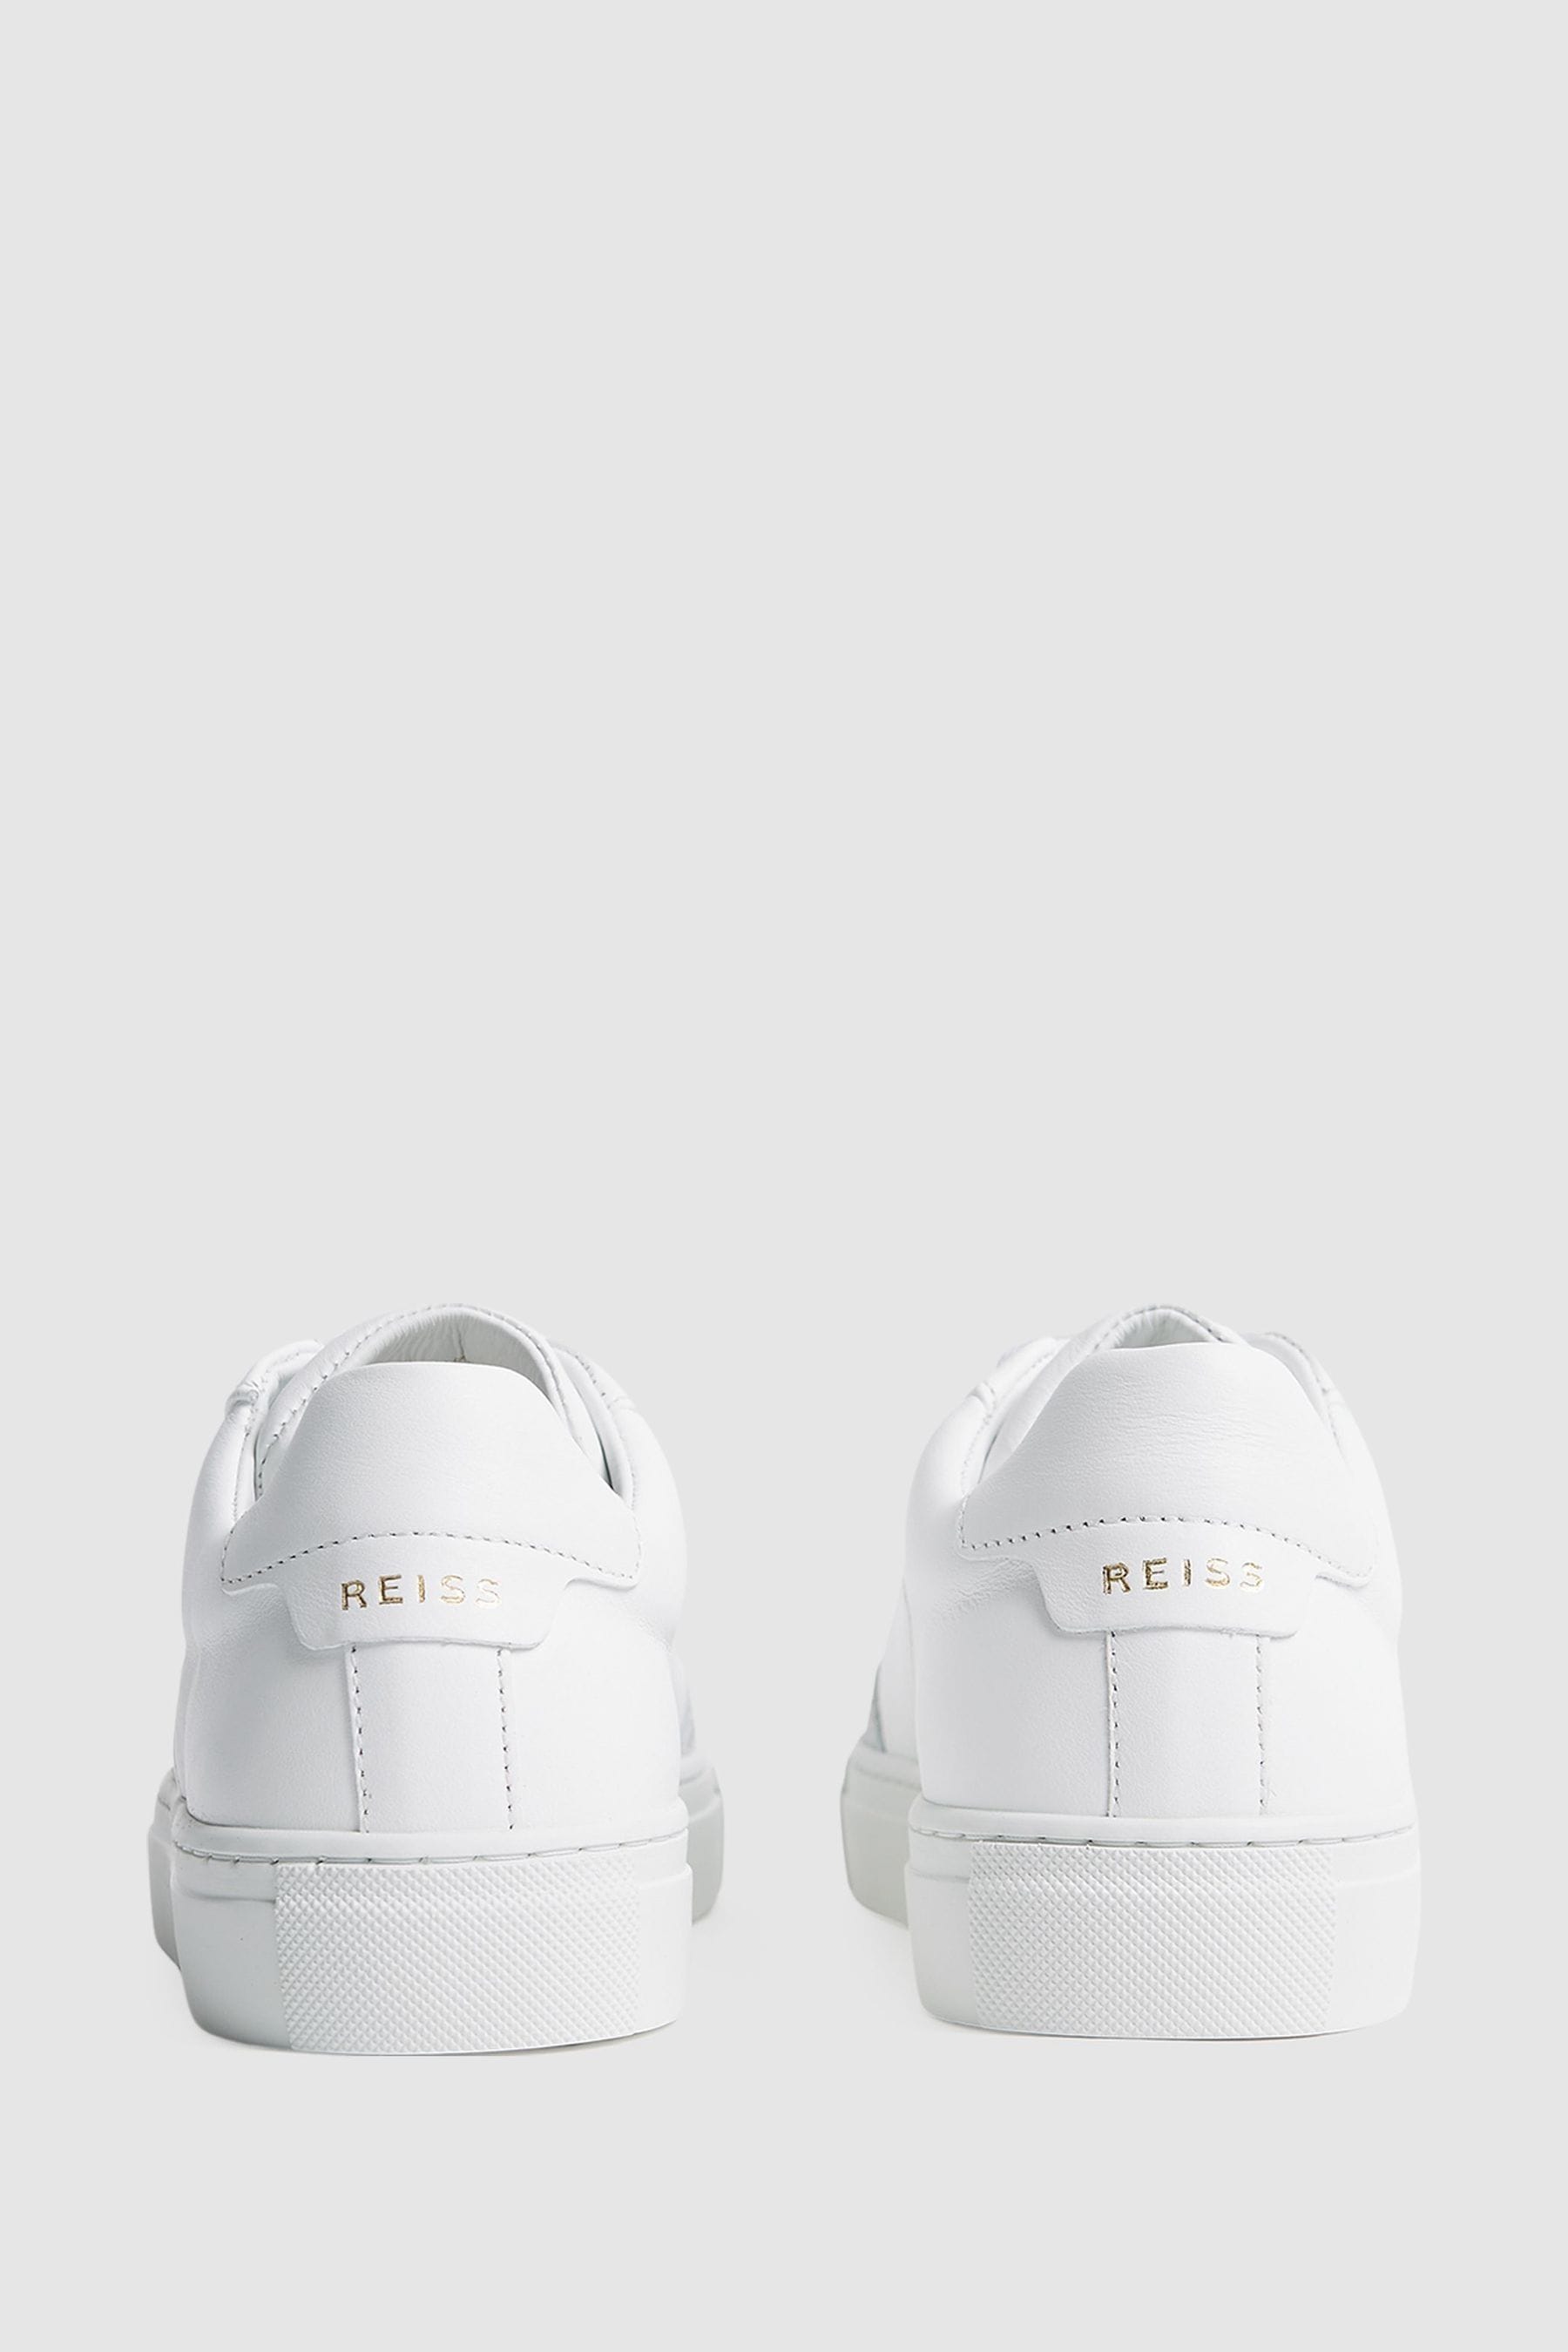 Buy Reiss White Ashley Leather Trainers from the Next UK online shop